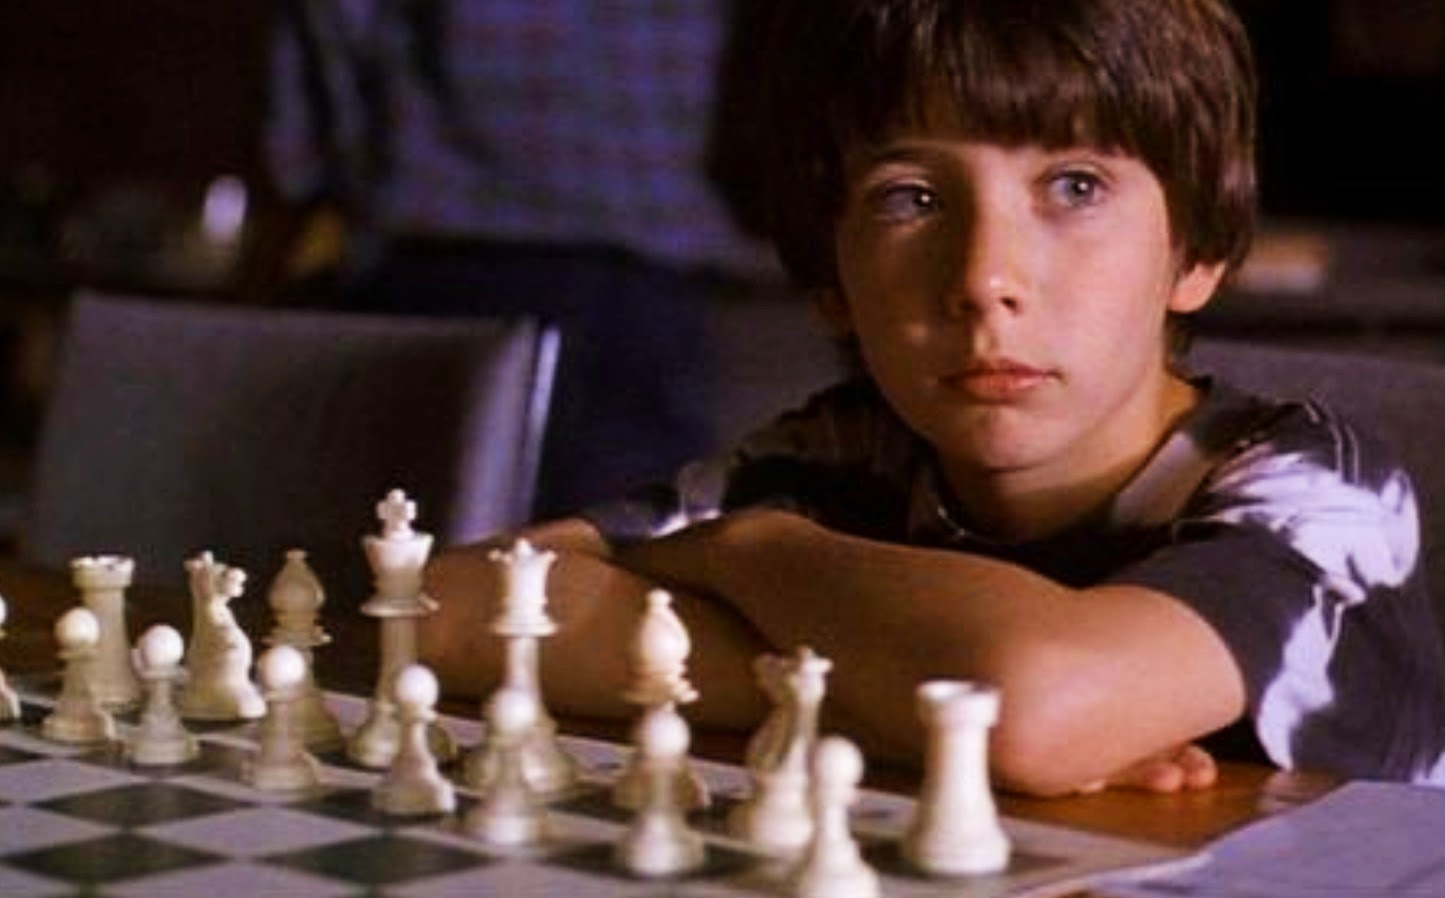 Max Pomeranc was eight when he starred as Josh Waitzkin in Searching for Bobby Fischer